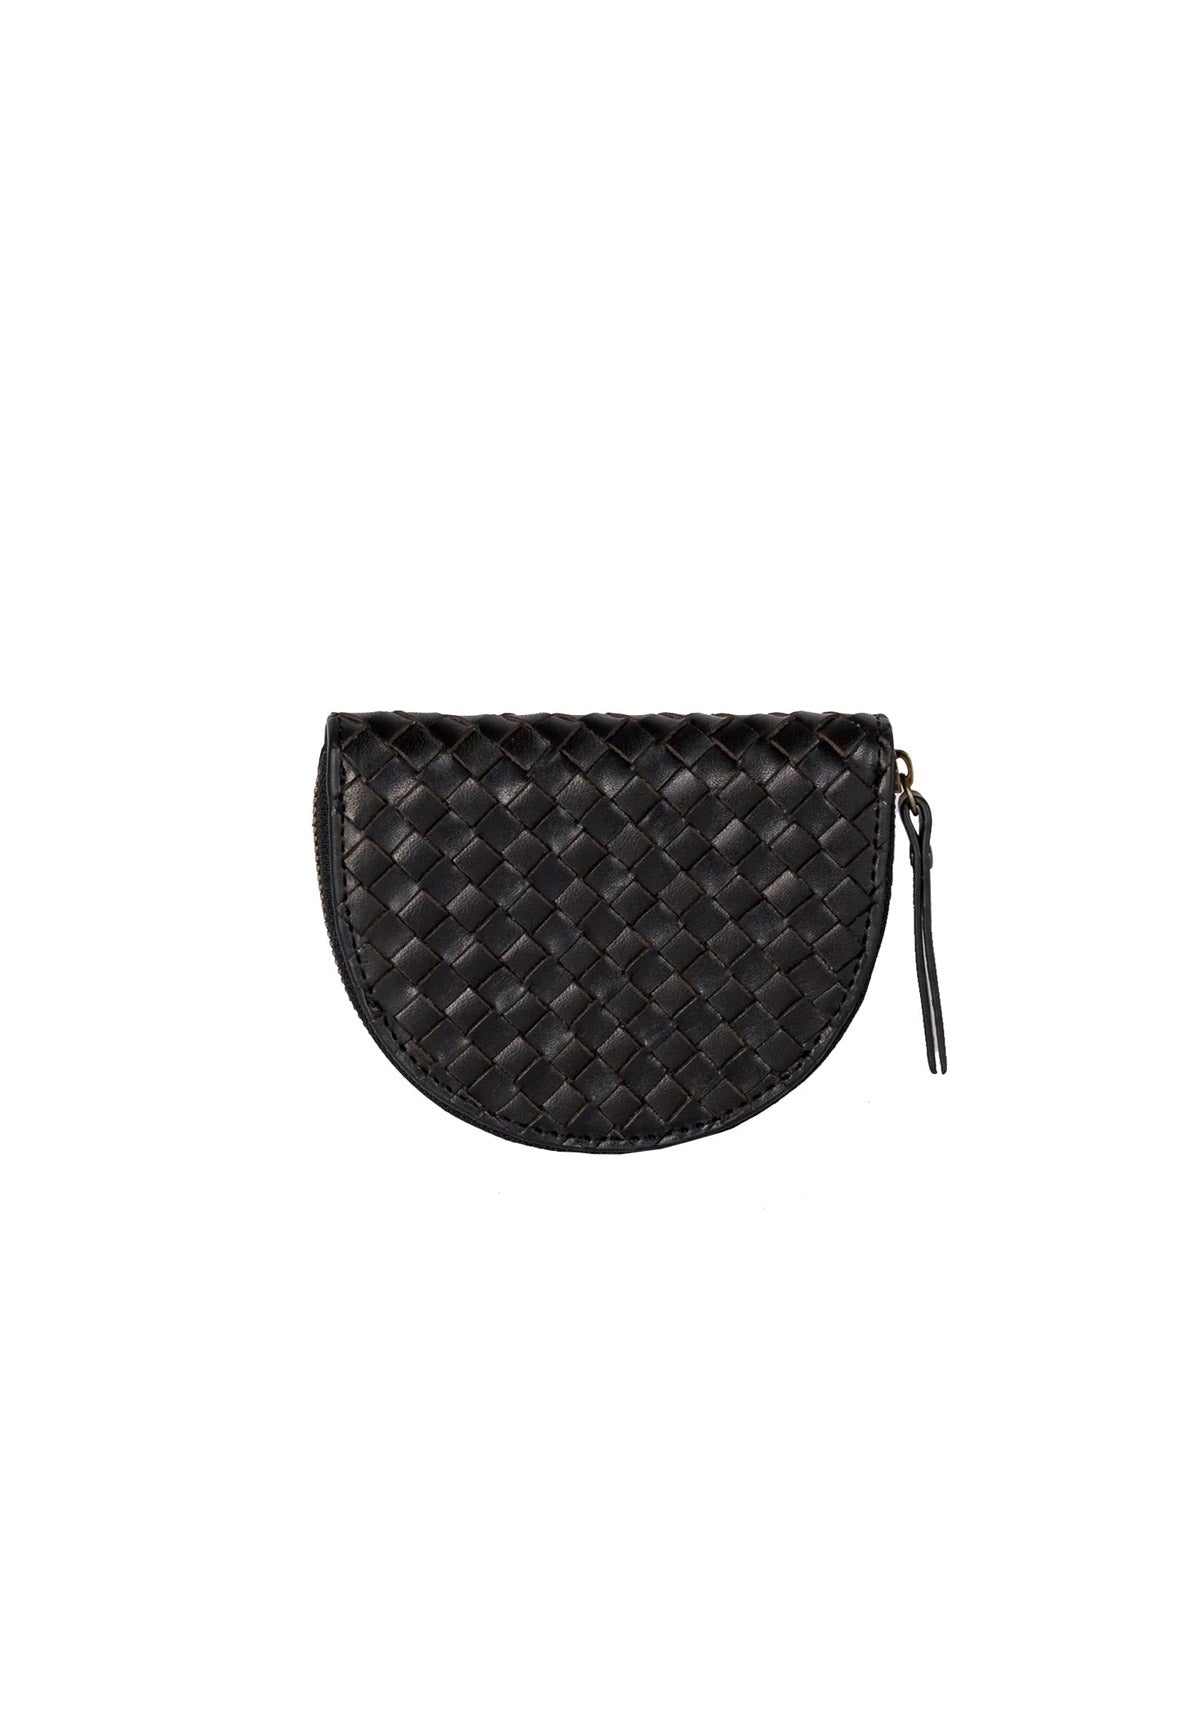 LAURA'S COIN PURSE BLACK WOVEN LEATHER